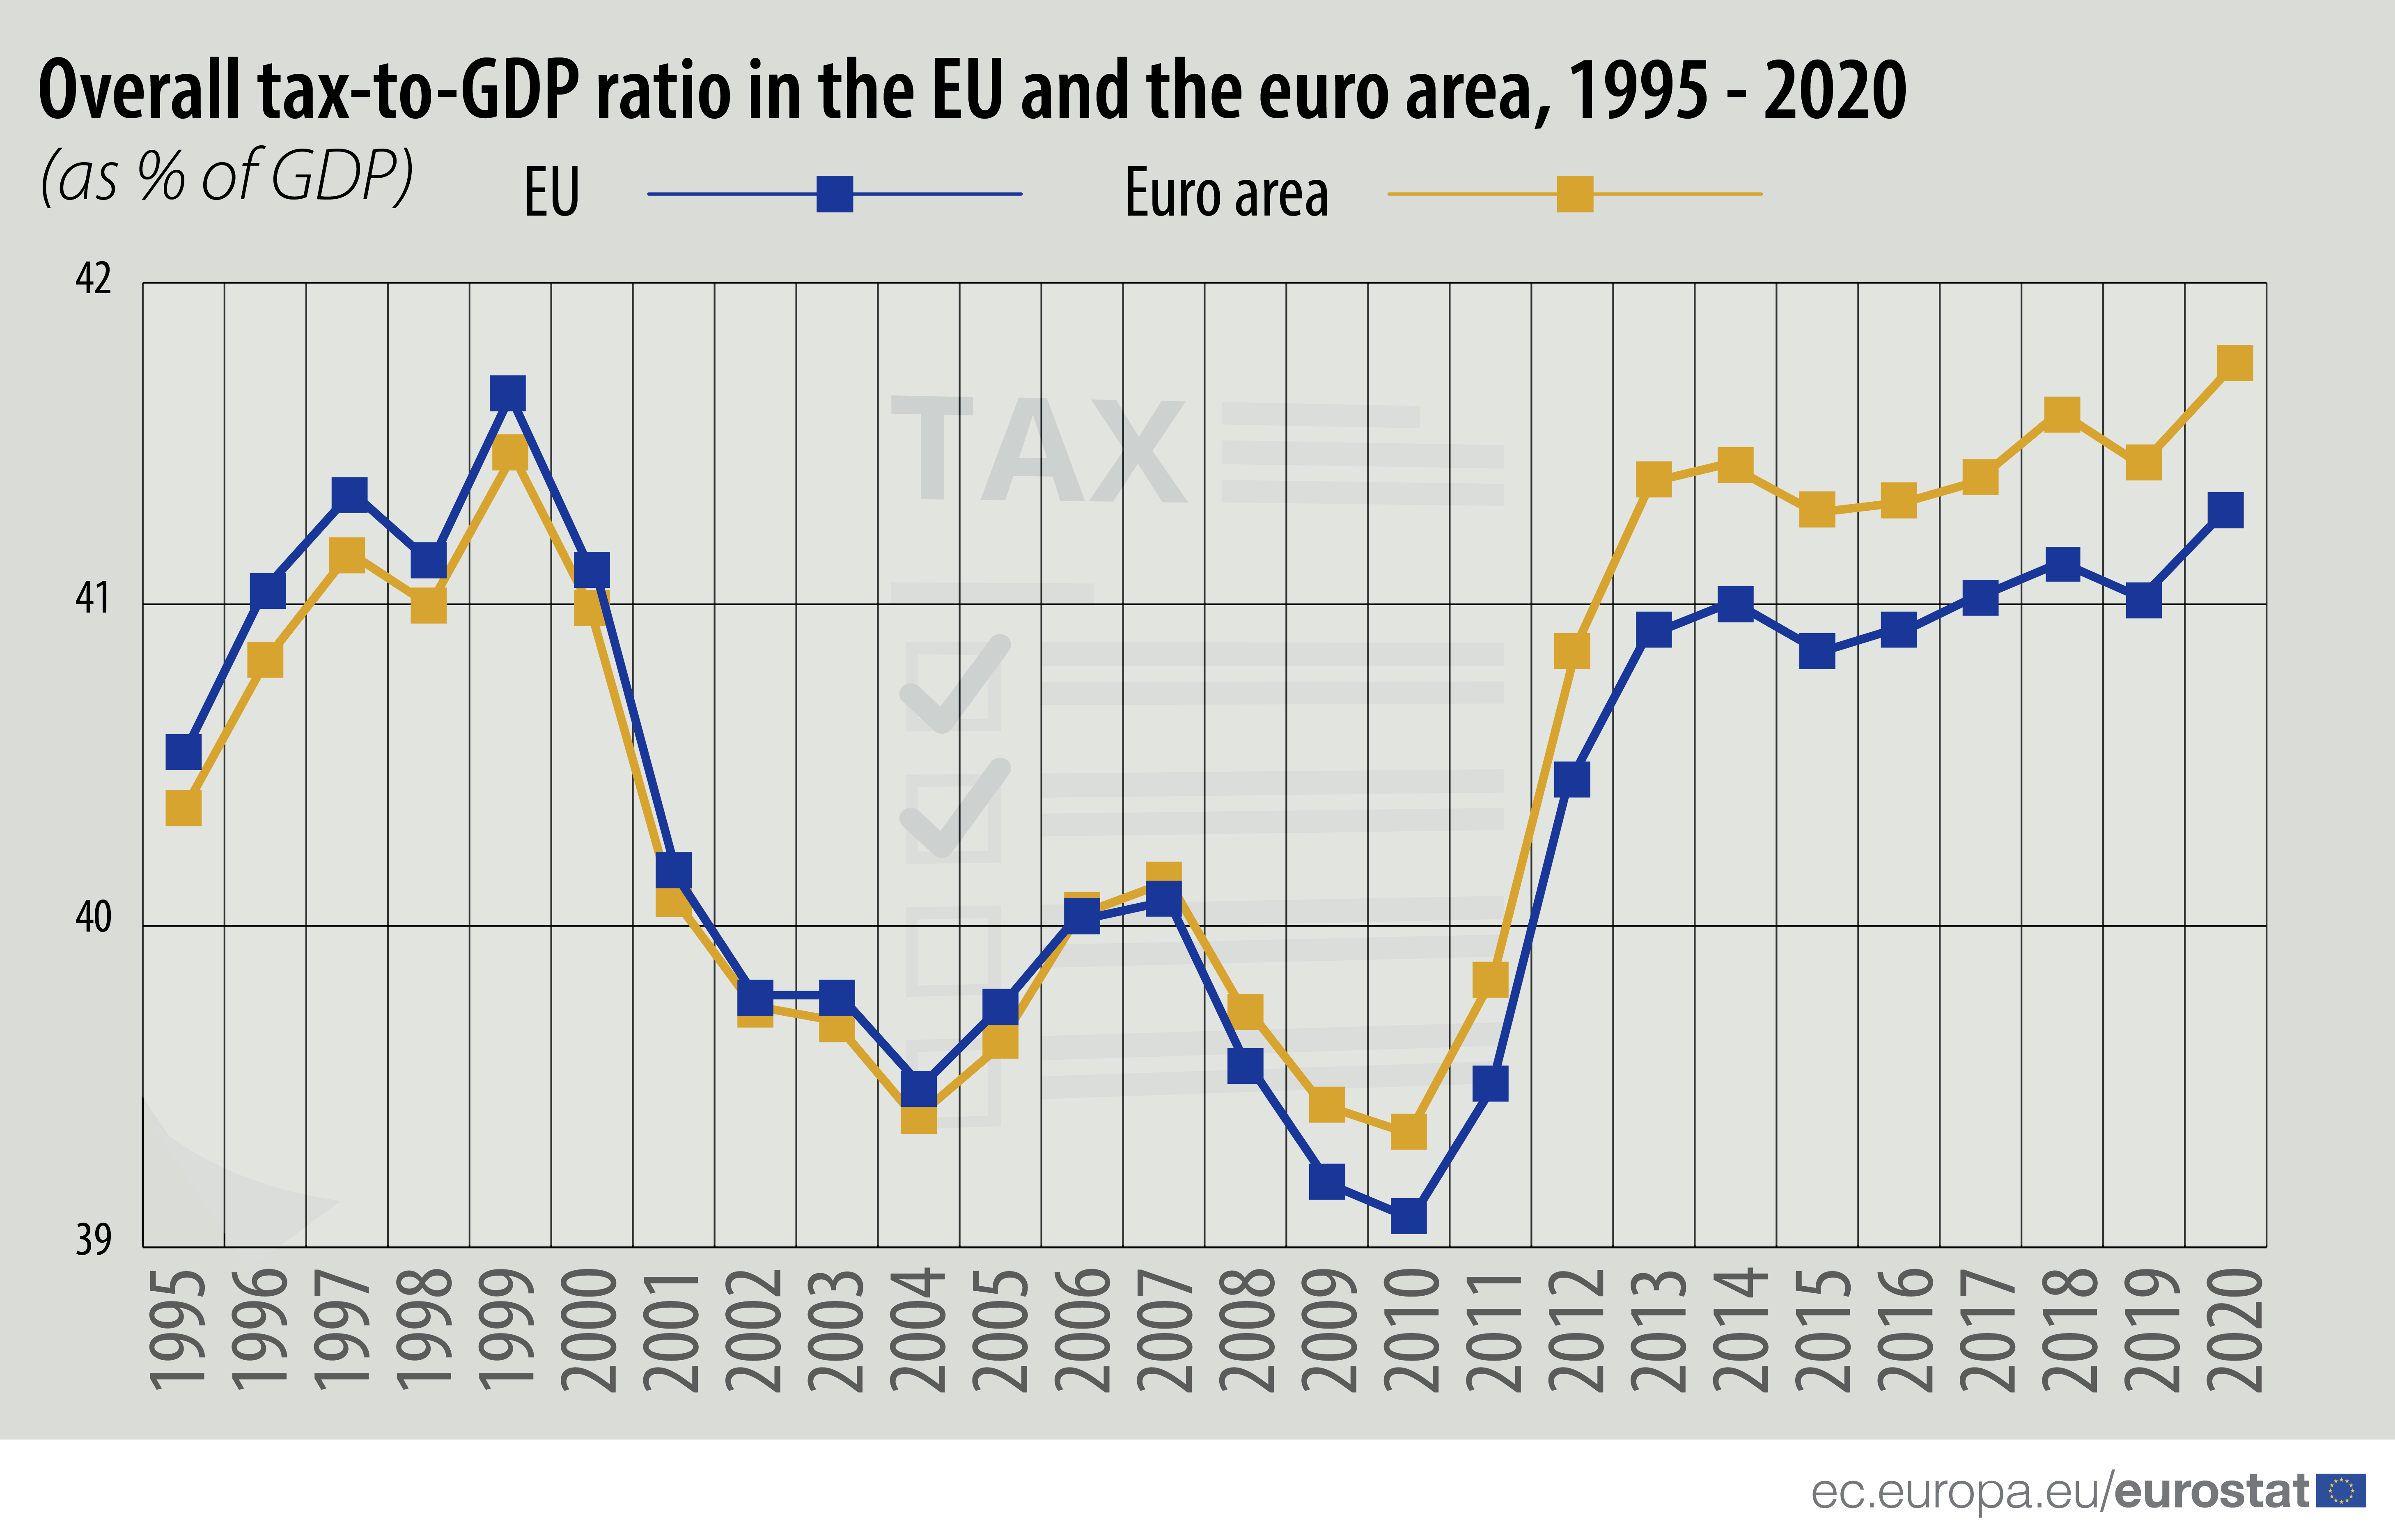 Time series: Overall tax-to-GDP ratio in the EU and euro area, 1995-2020, as % of GDP